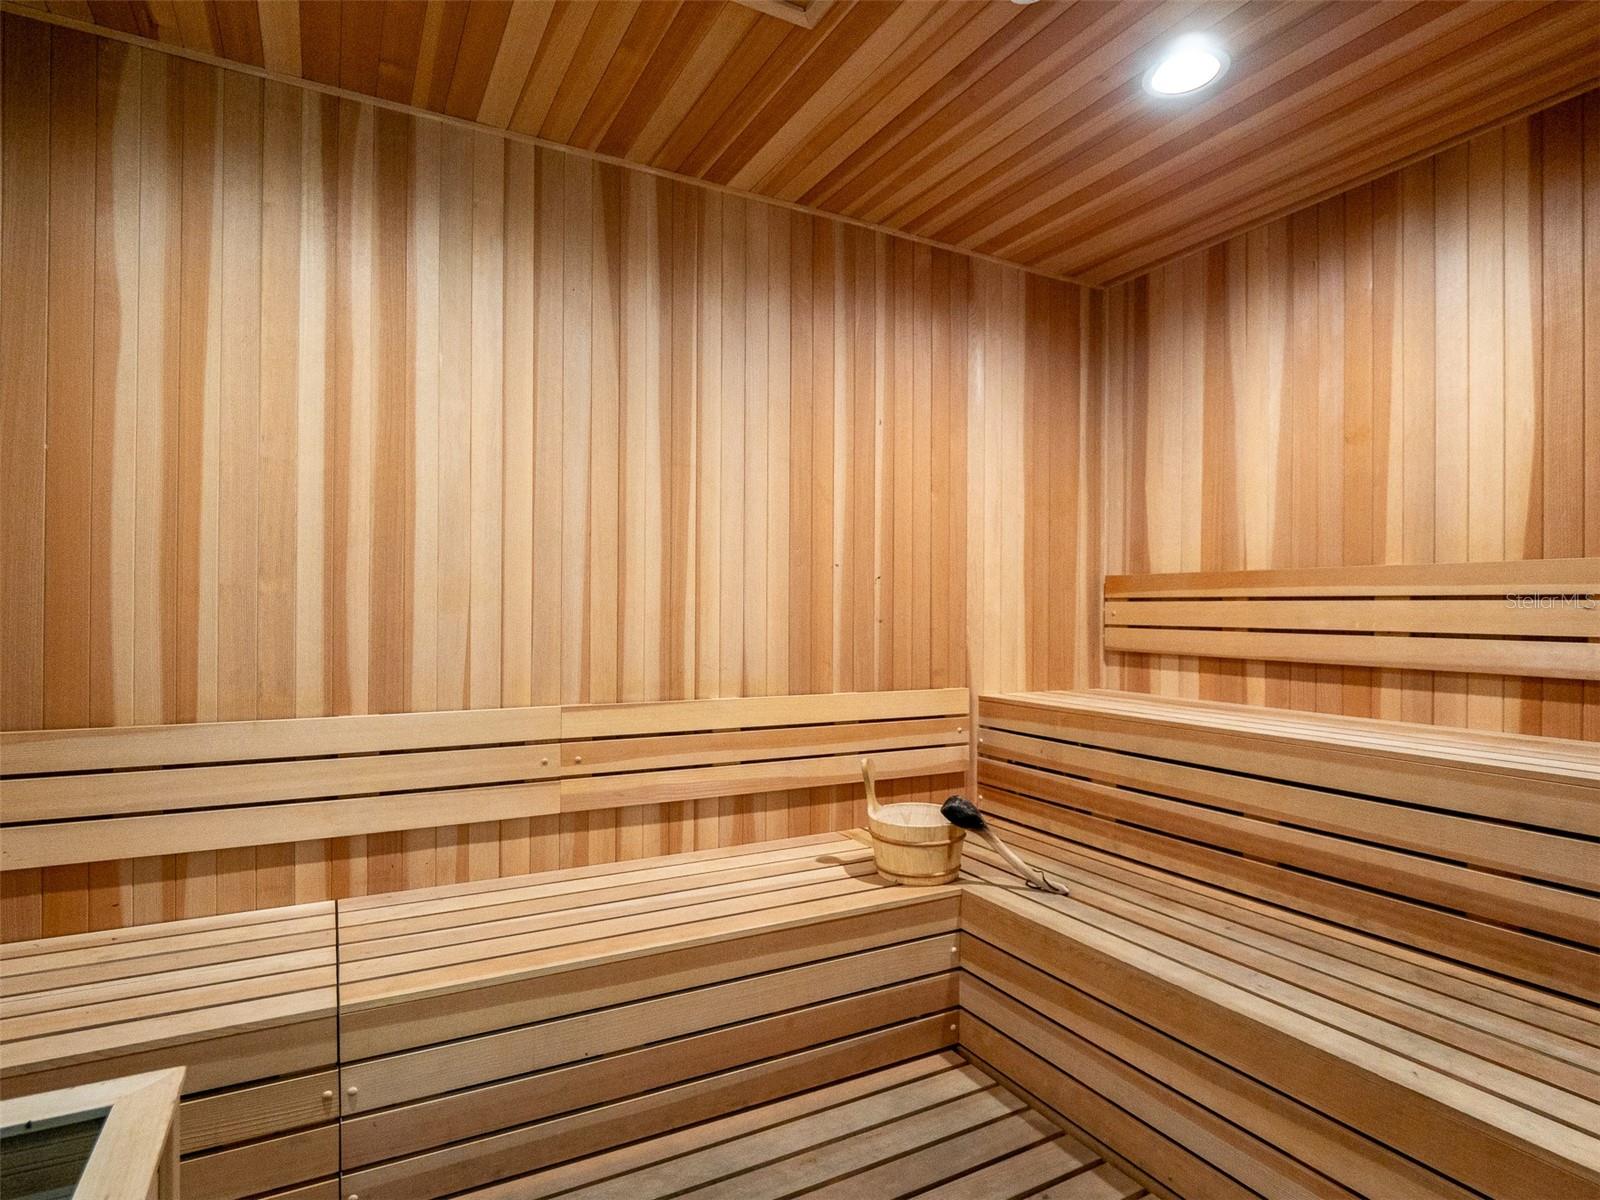 Sauna room for a better health and fitness routine